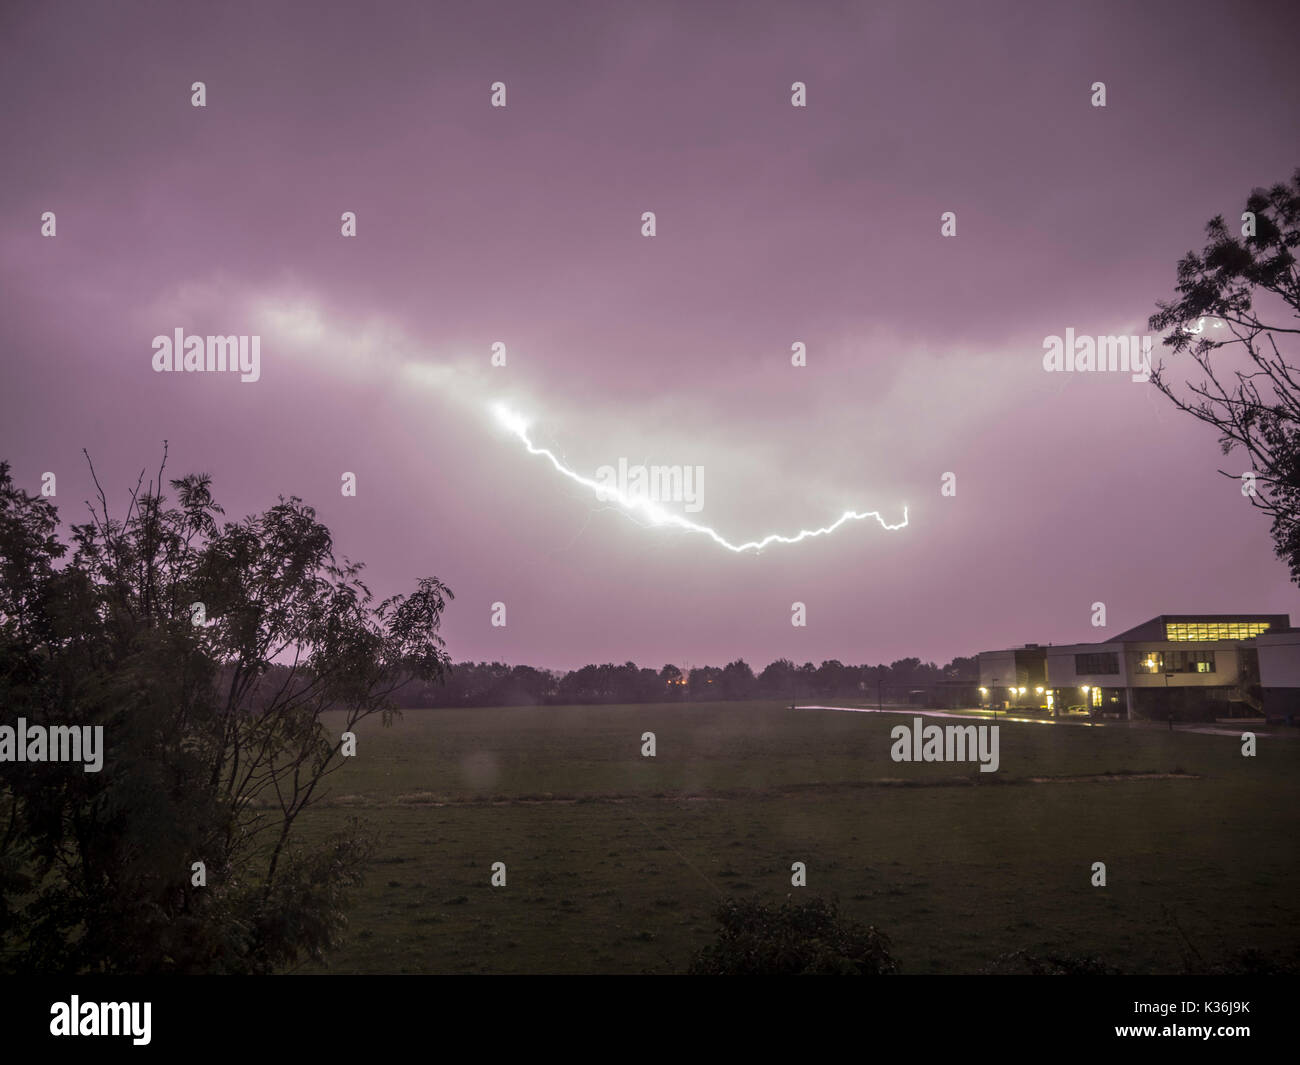 Sheerness, Kent. 2nd Sep, 2017. UK Weather: lightning over Sheerness. Building pictured: Oasis Academy Isle of Sheppey (West Campus) and playing fields. Around midnight: strong winds, heavy rain and initially silent lightning, followed by thunder at 12.30 am when most of these pictures were taken. Credit: James Bell/Alamy Live News Stock Photo